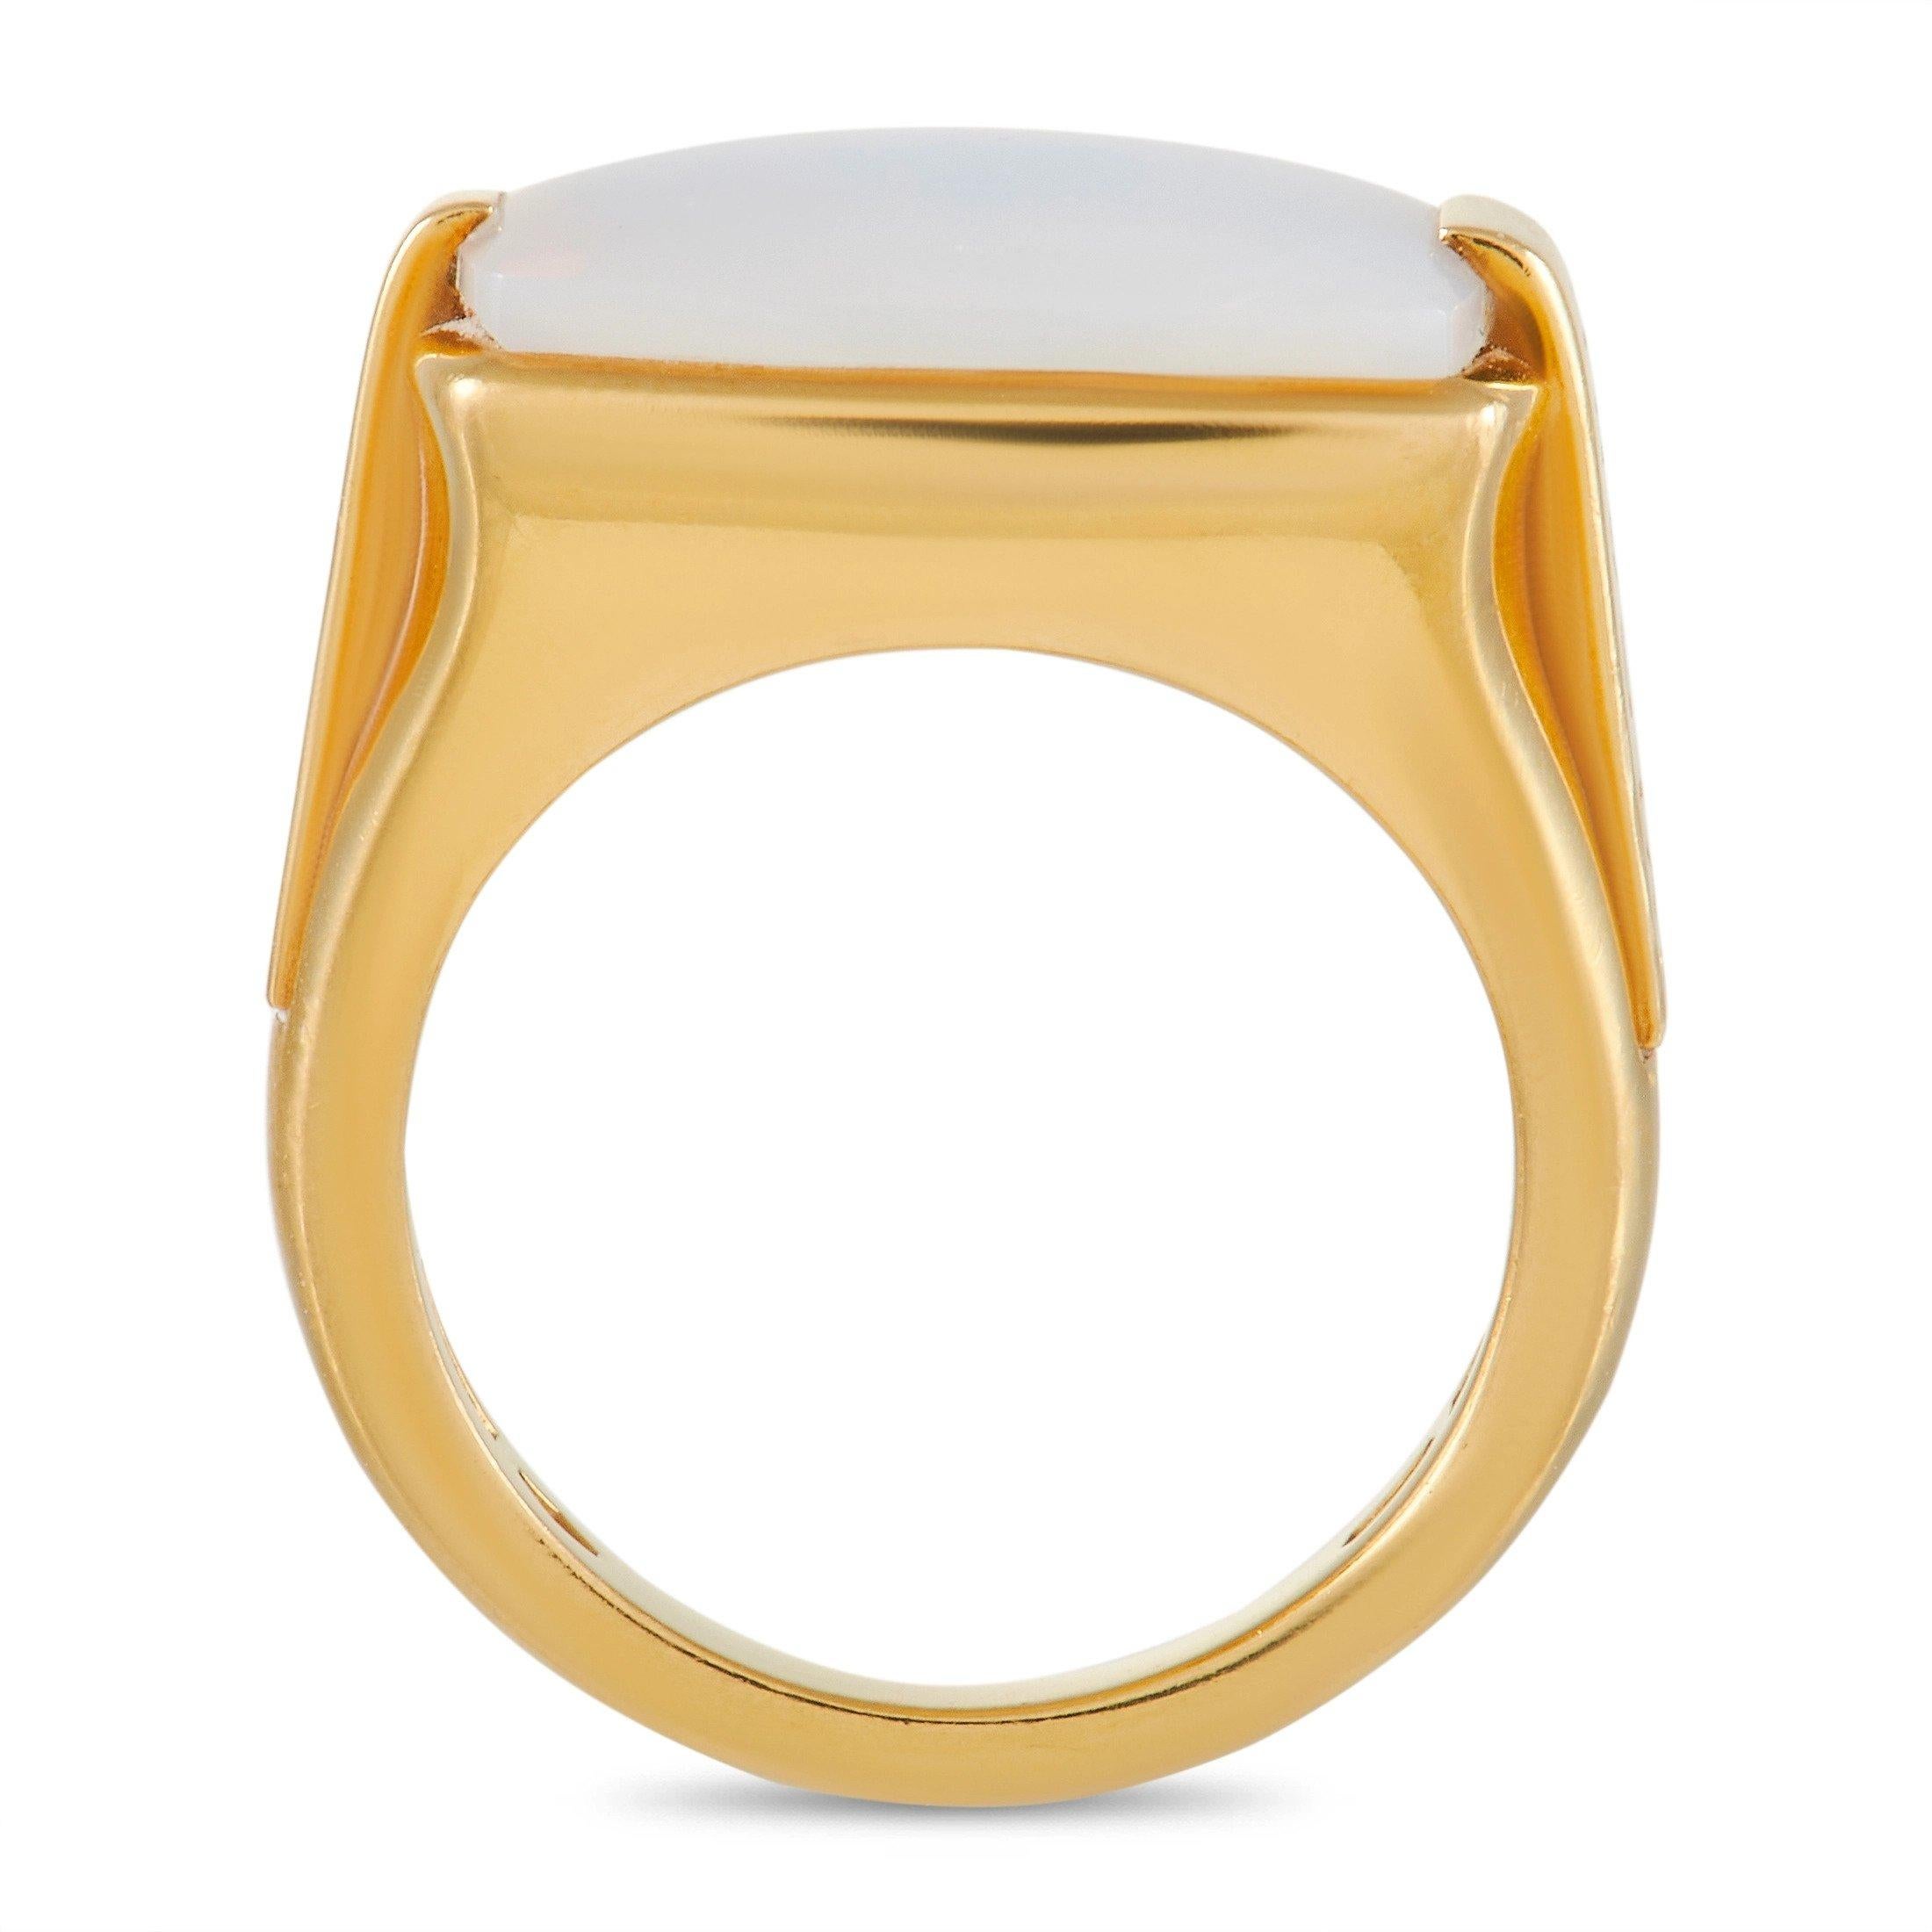 Bold, attractive, and incredibly alluring, this Bvlgari ring perfectly pairs beauty with strength. This piece’s confident 18K yellow gold setting features a 4mm wide band and a 7mm top height. But it’s the smooth, rectangular opal center stone that